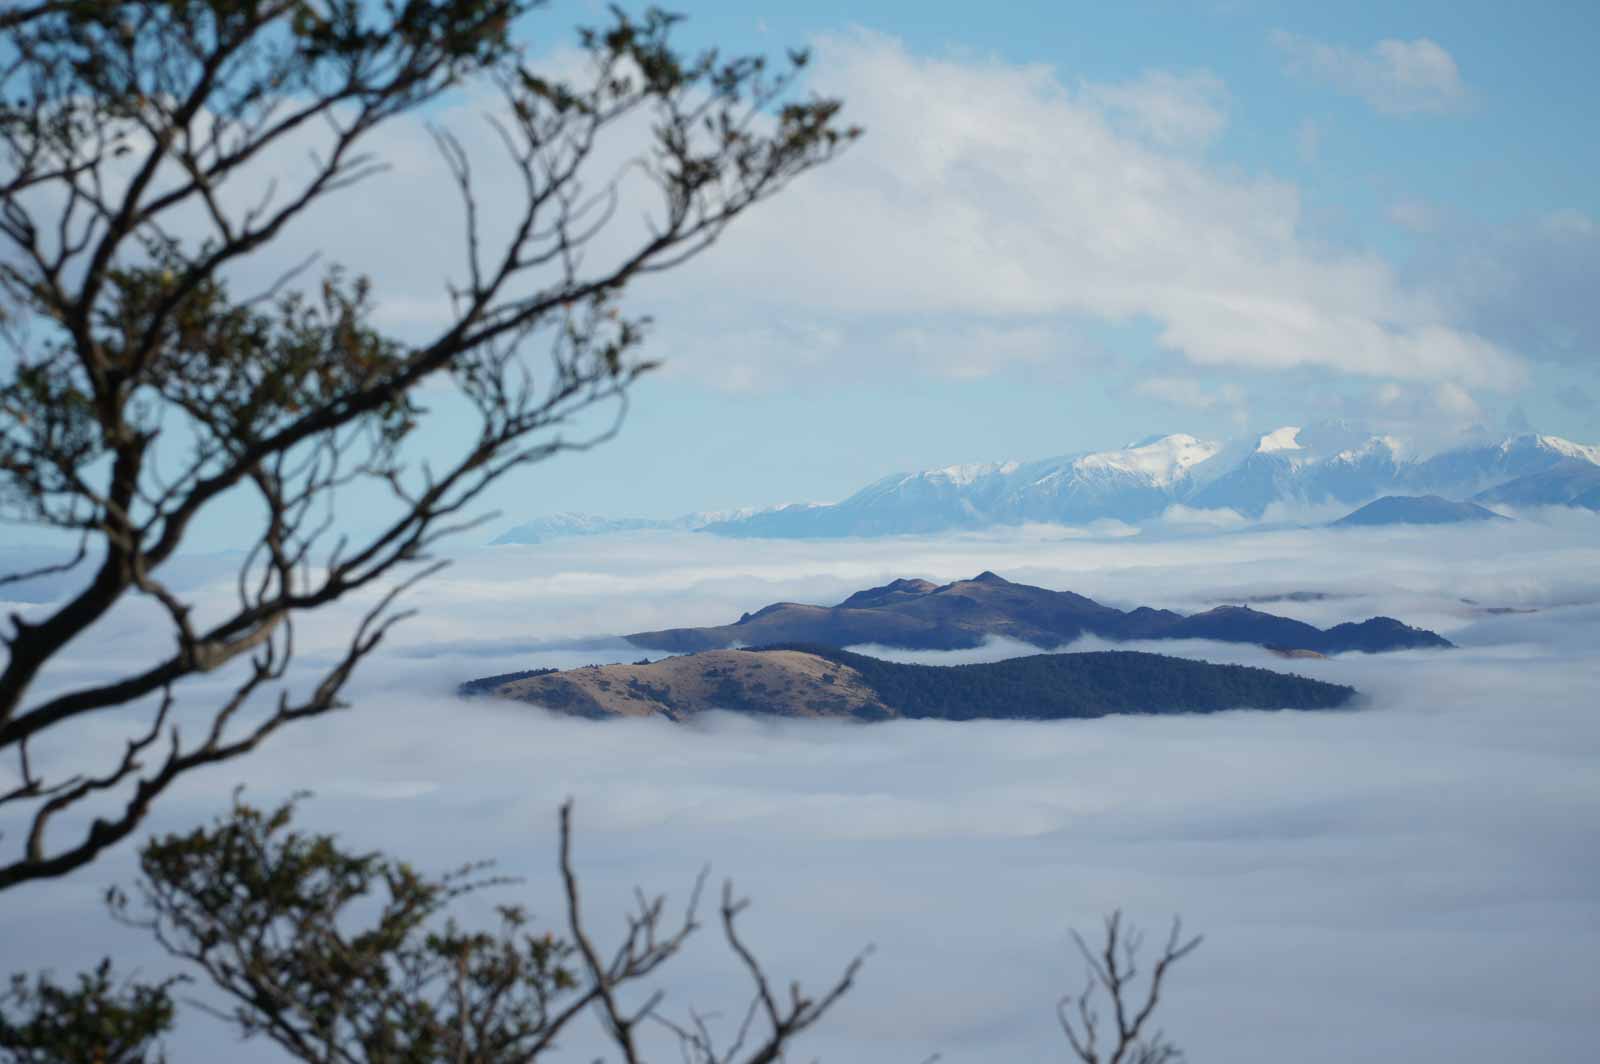 Islands in the clouds. Taken on the saddle.